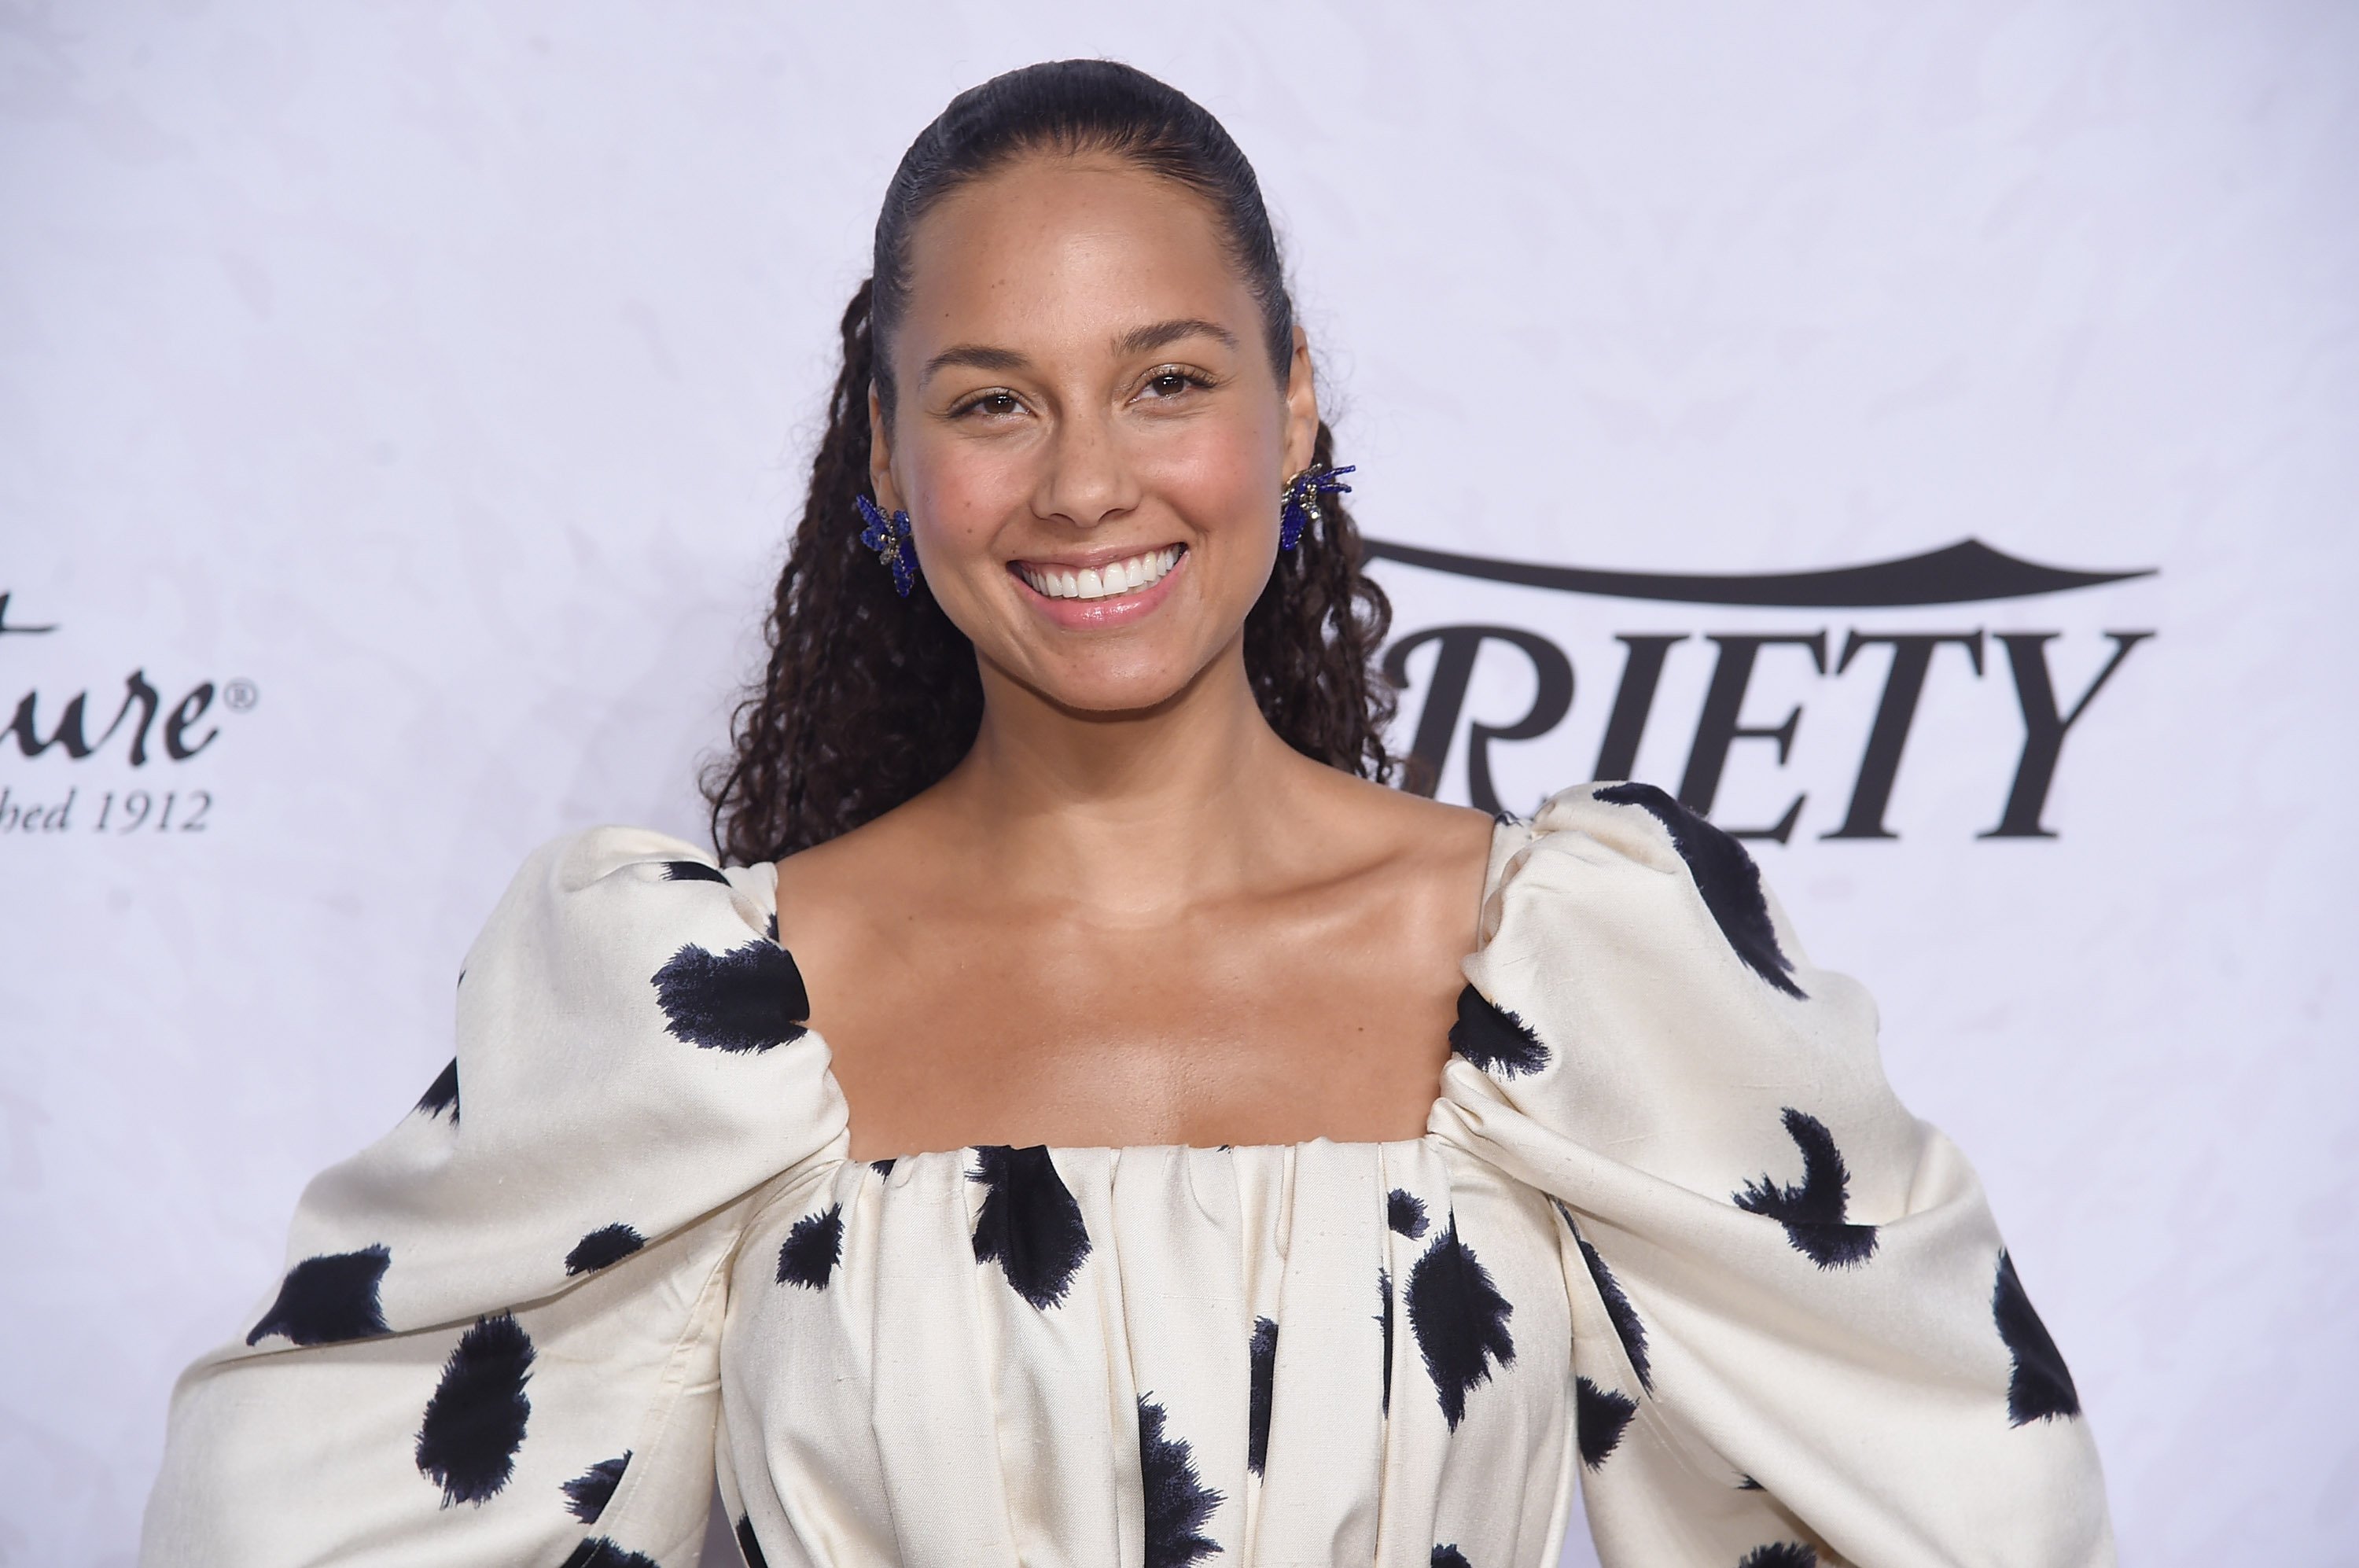 Alicia Keys at Variety's "Power of Women: New York" at Cipriani Wall Street on April 13, 2018 in New York City. | Photo: Getty Images